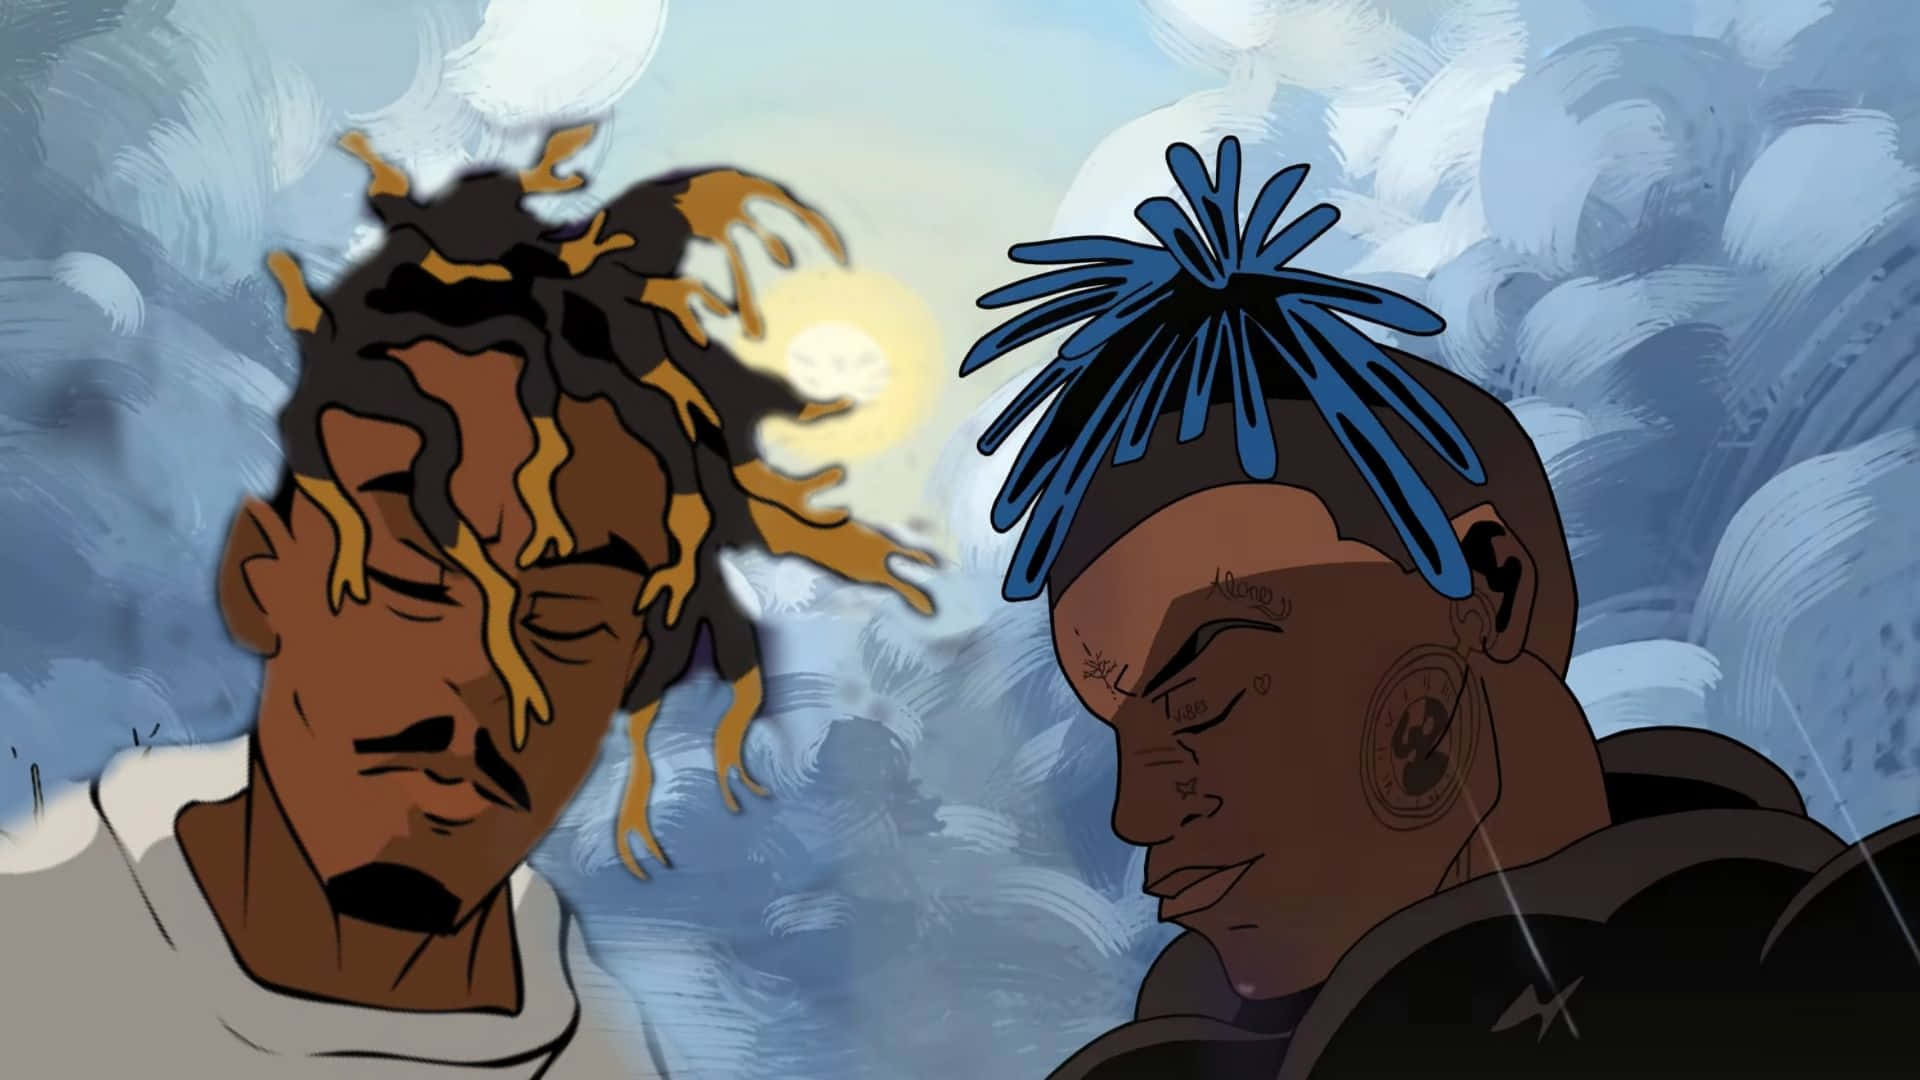 Xxxtentacion And Juice Wrld, Two Of The Biggest Names In Rap.